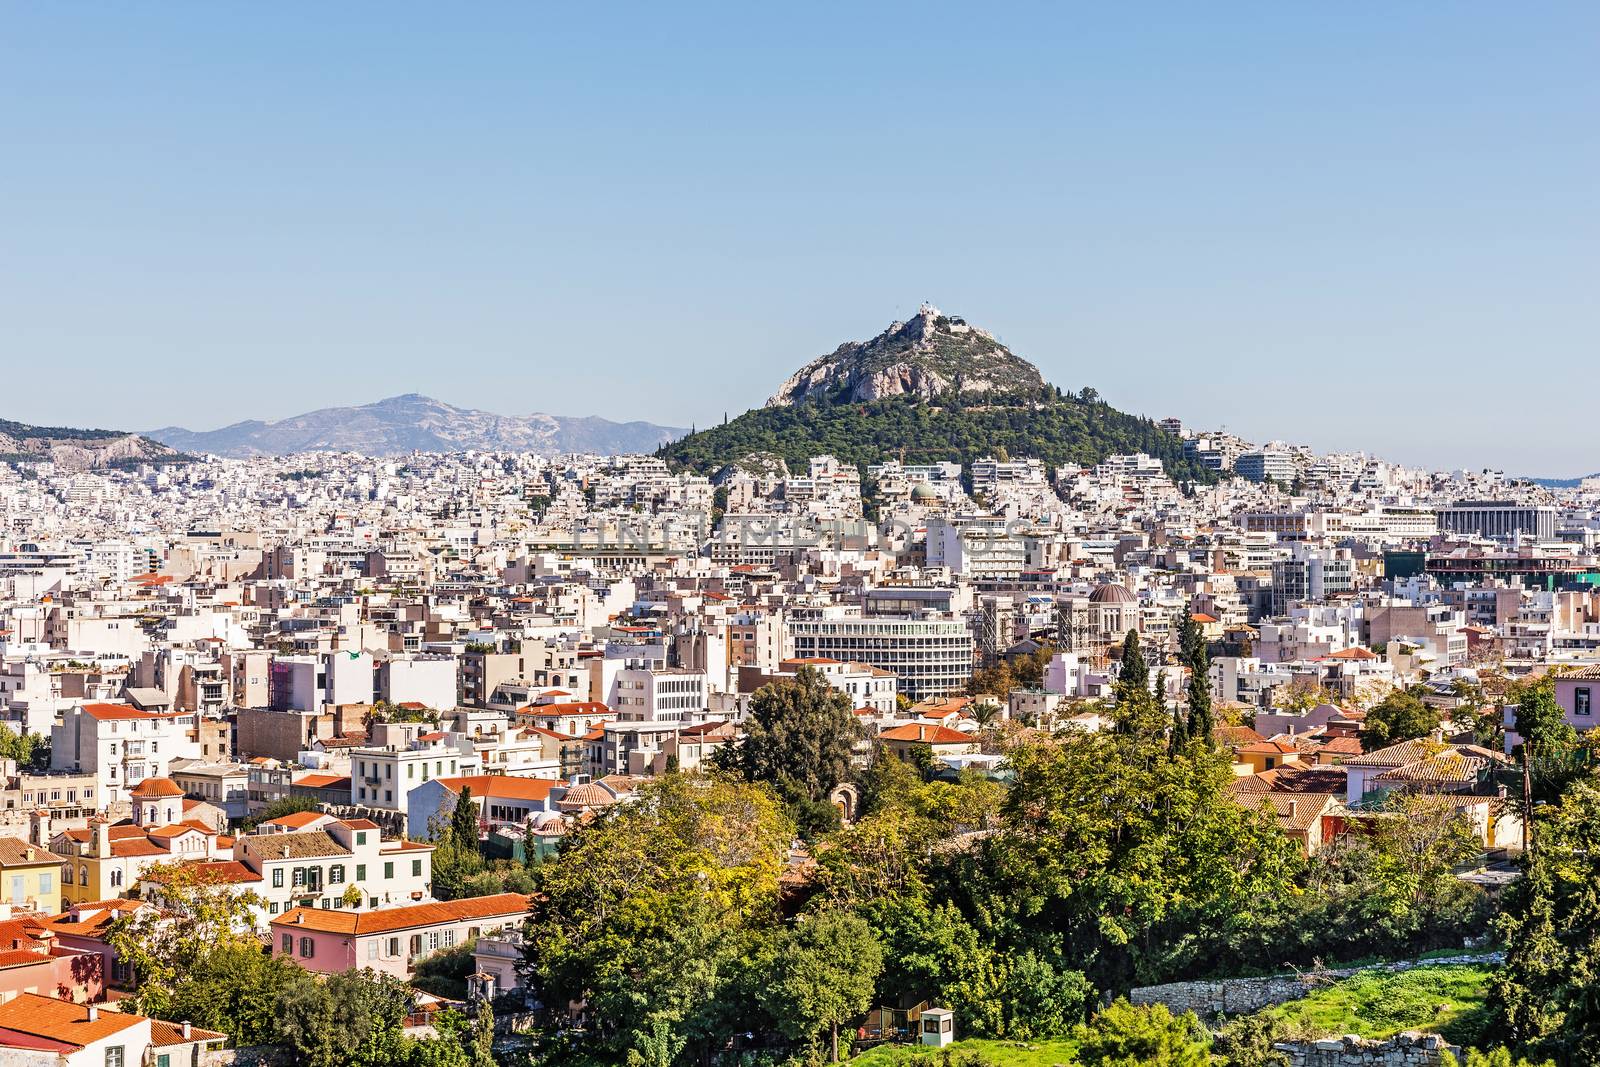 Mount Lycabettus in Athens, rising from the city a cretaceous limestone hill at 300 above sea level, with the 19th century Chapel of St. George at the peak.